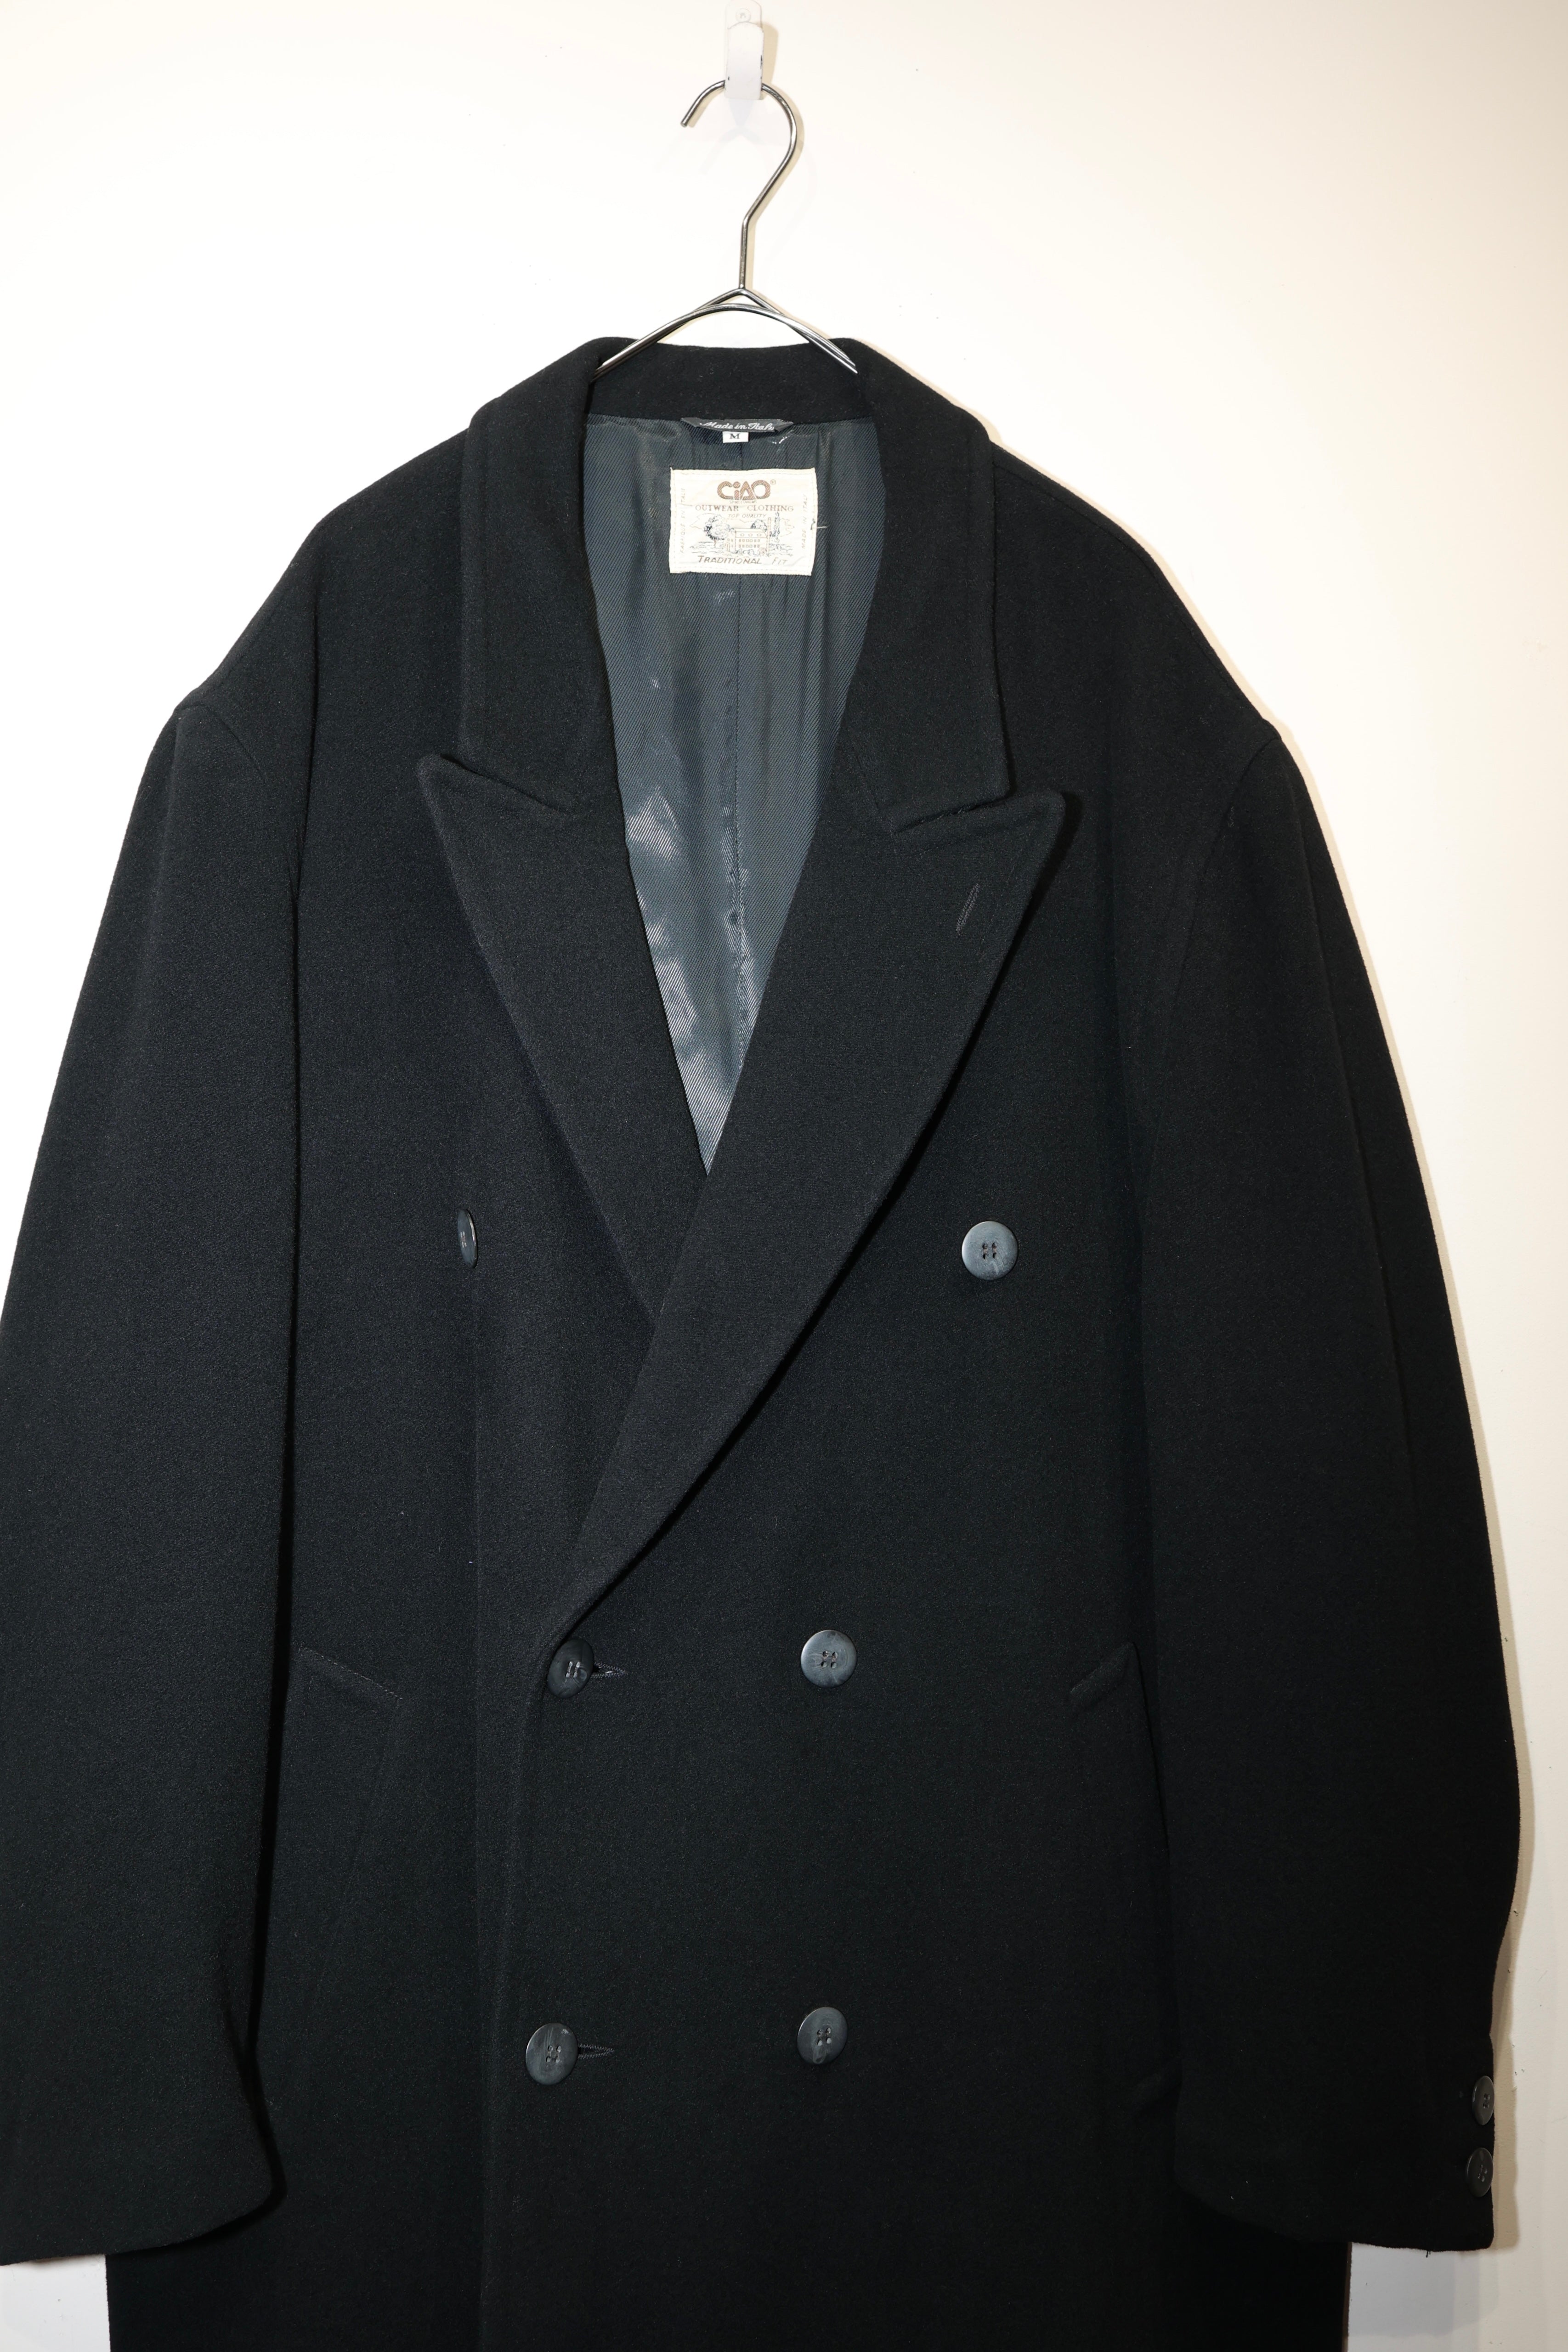 80's Italian label "CIAO" cashmere mixed wool double breasted coat